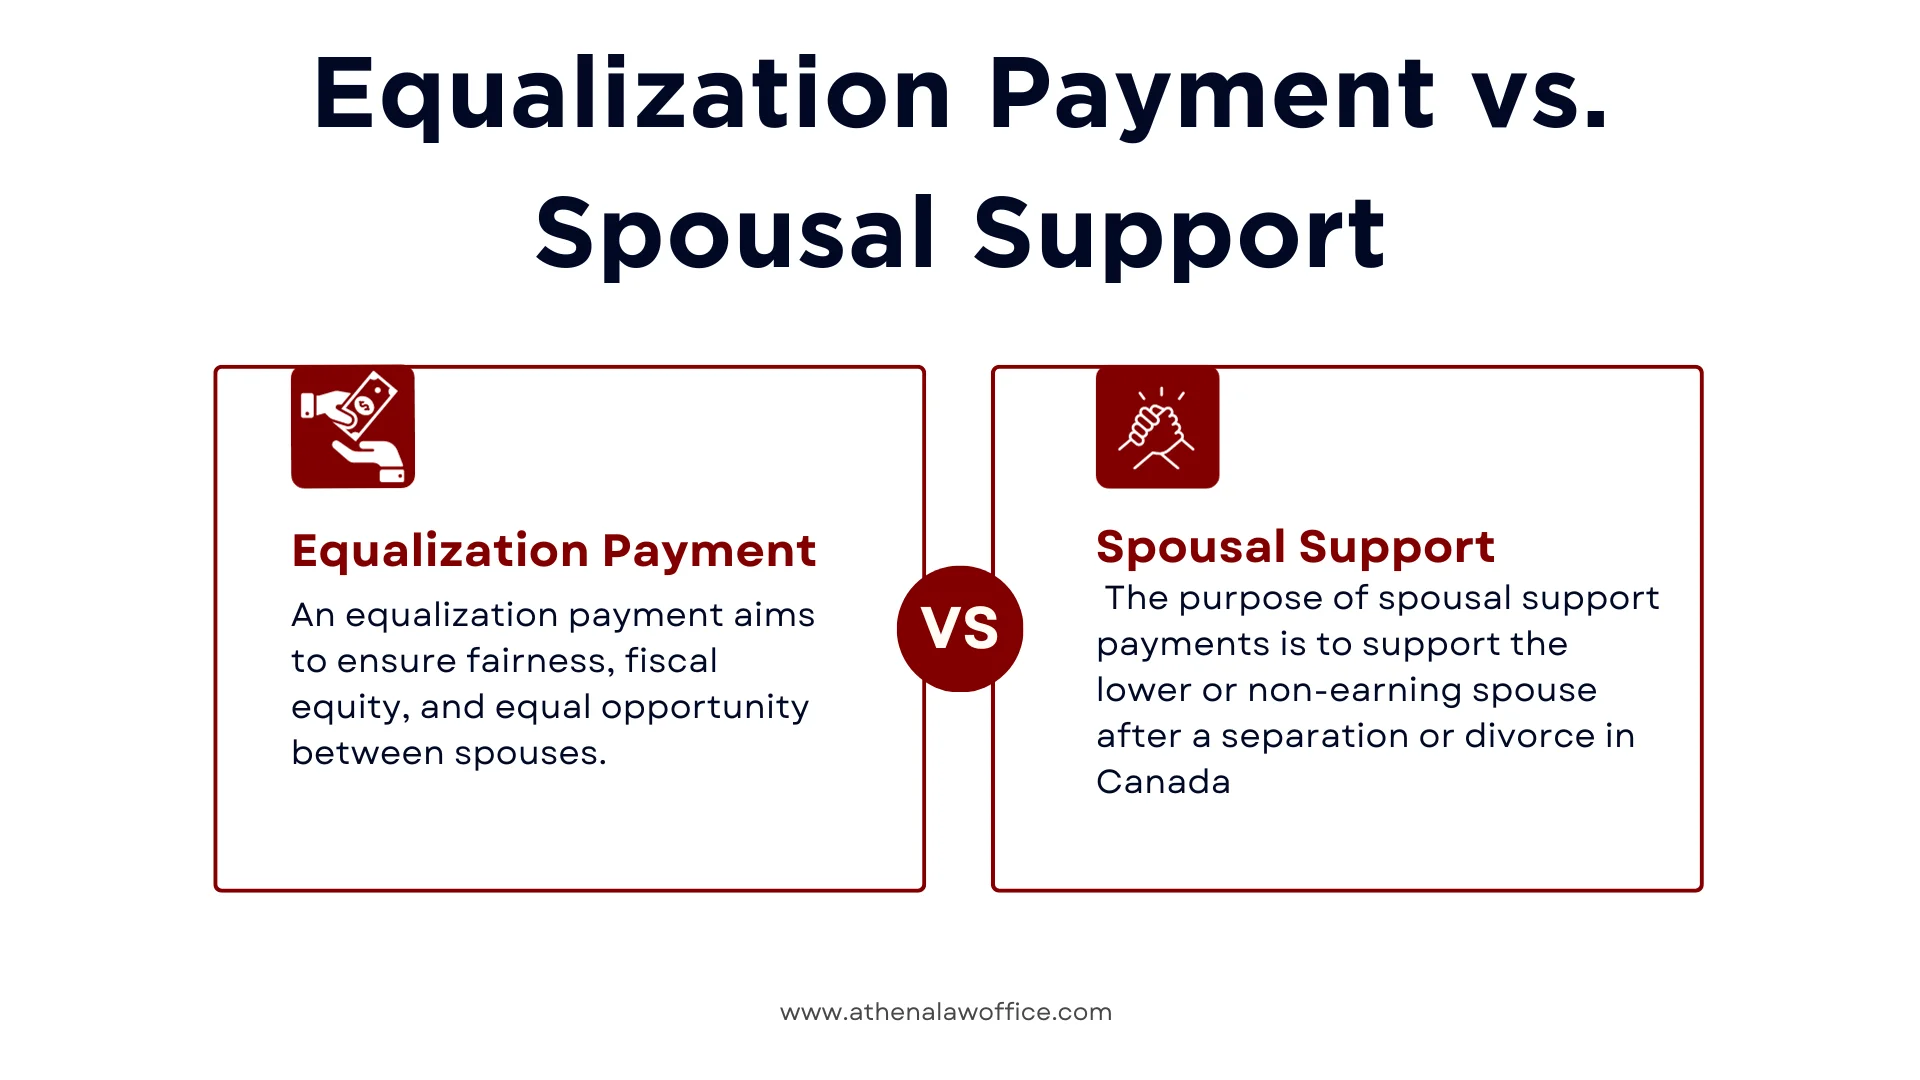 A comparison table comparing equalization payments vs spousal support